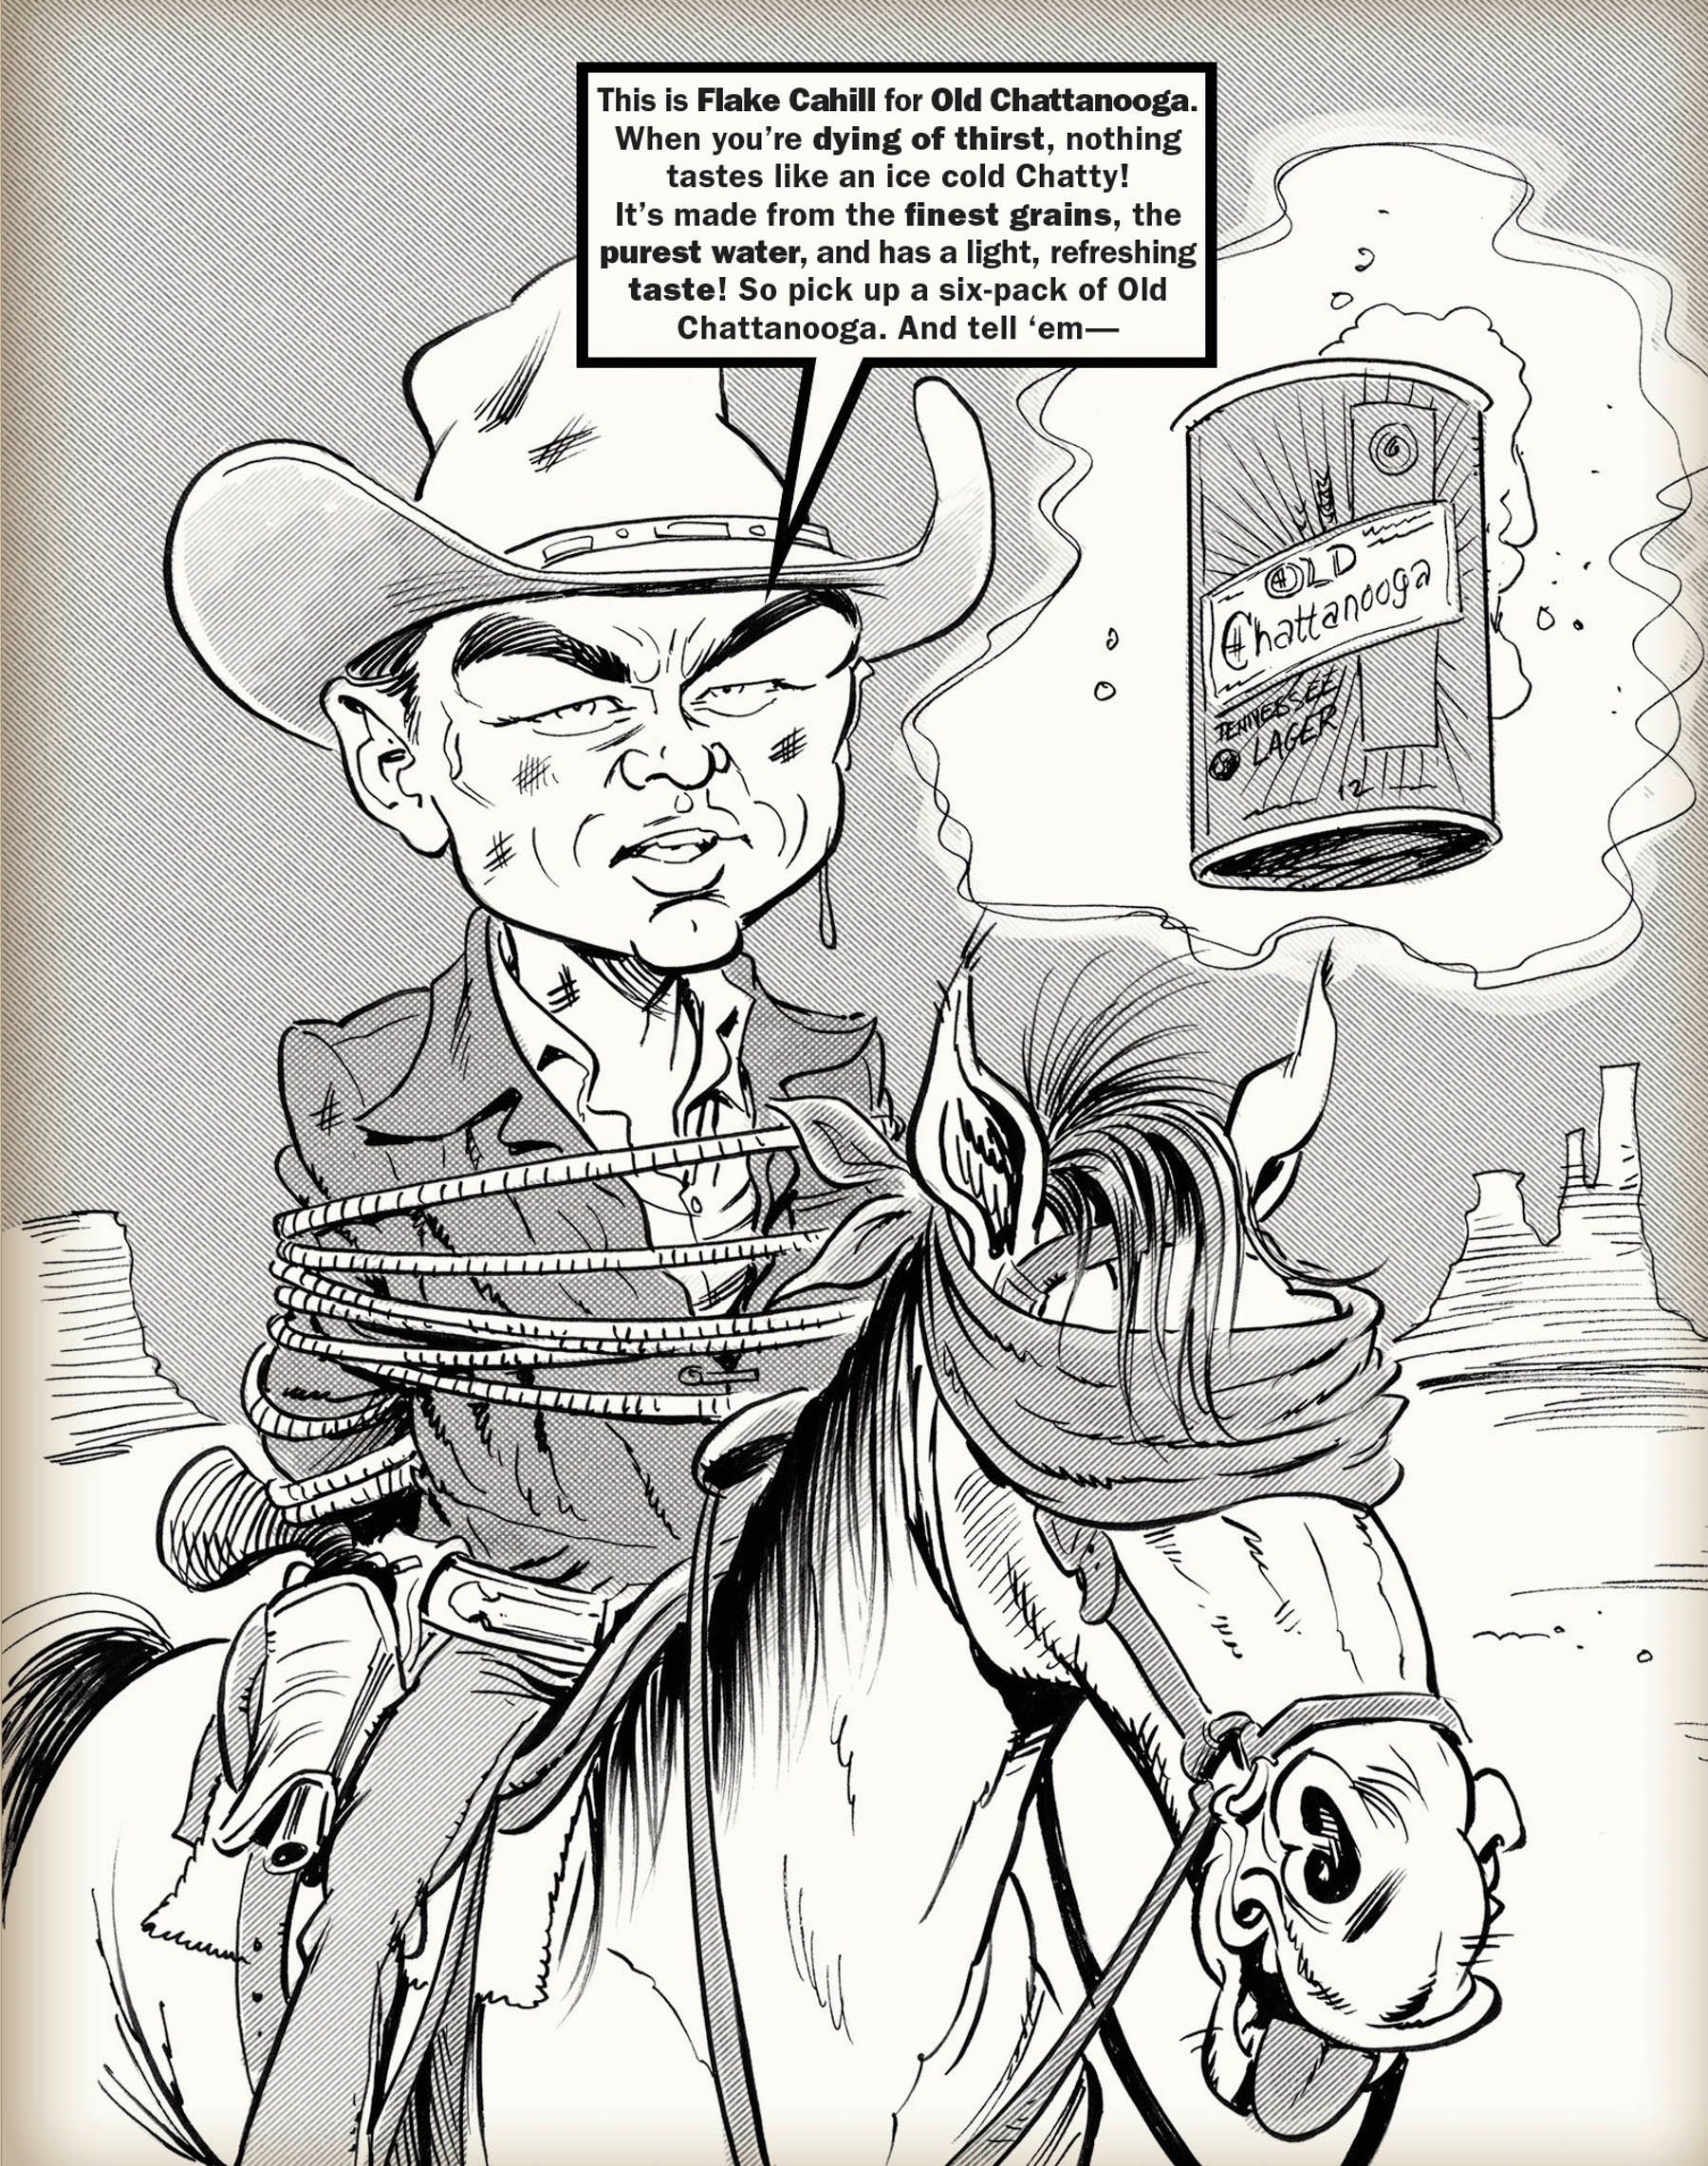 Once Upon a Time Mad Magazine image #5